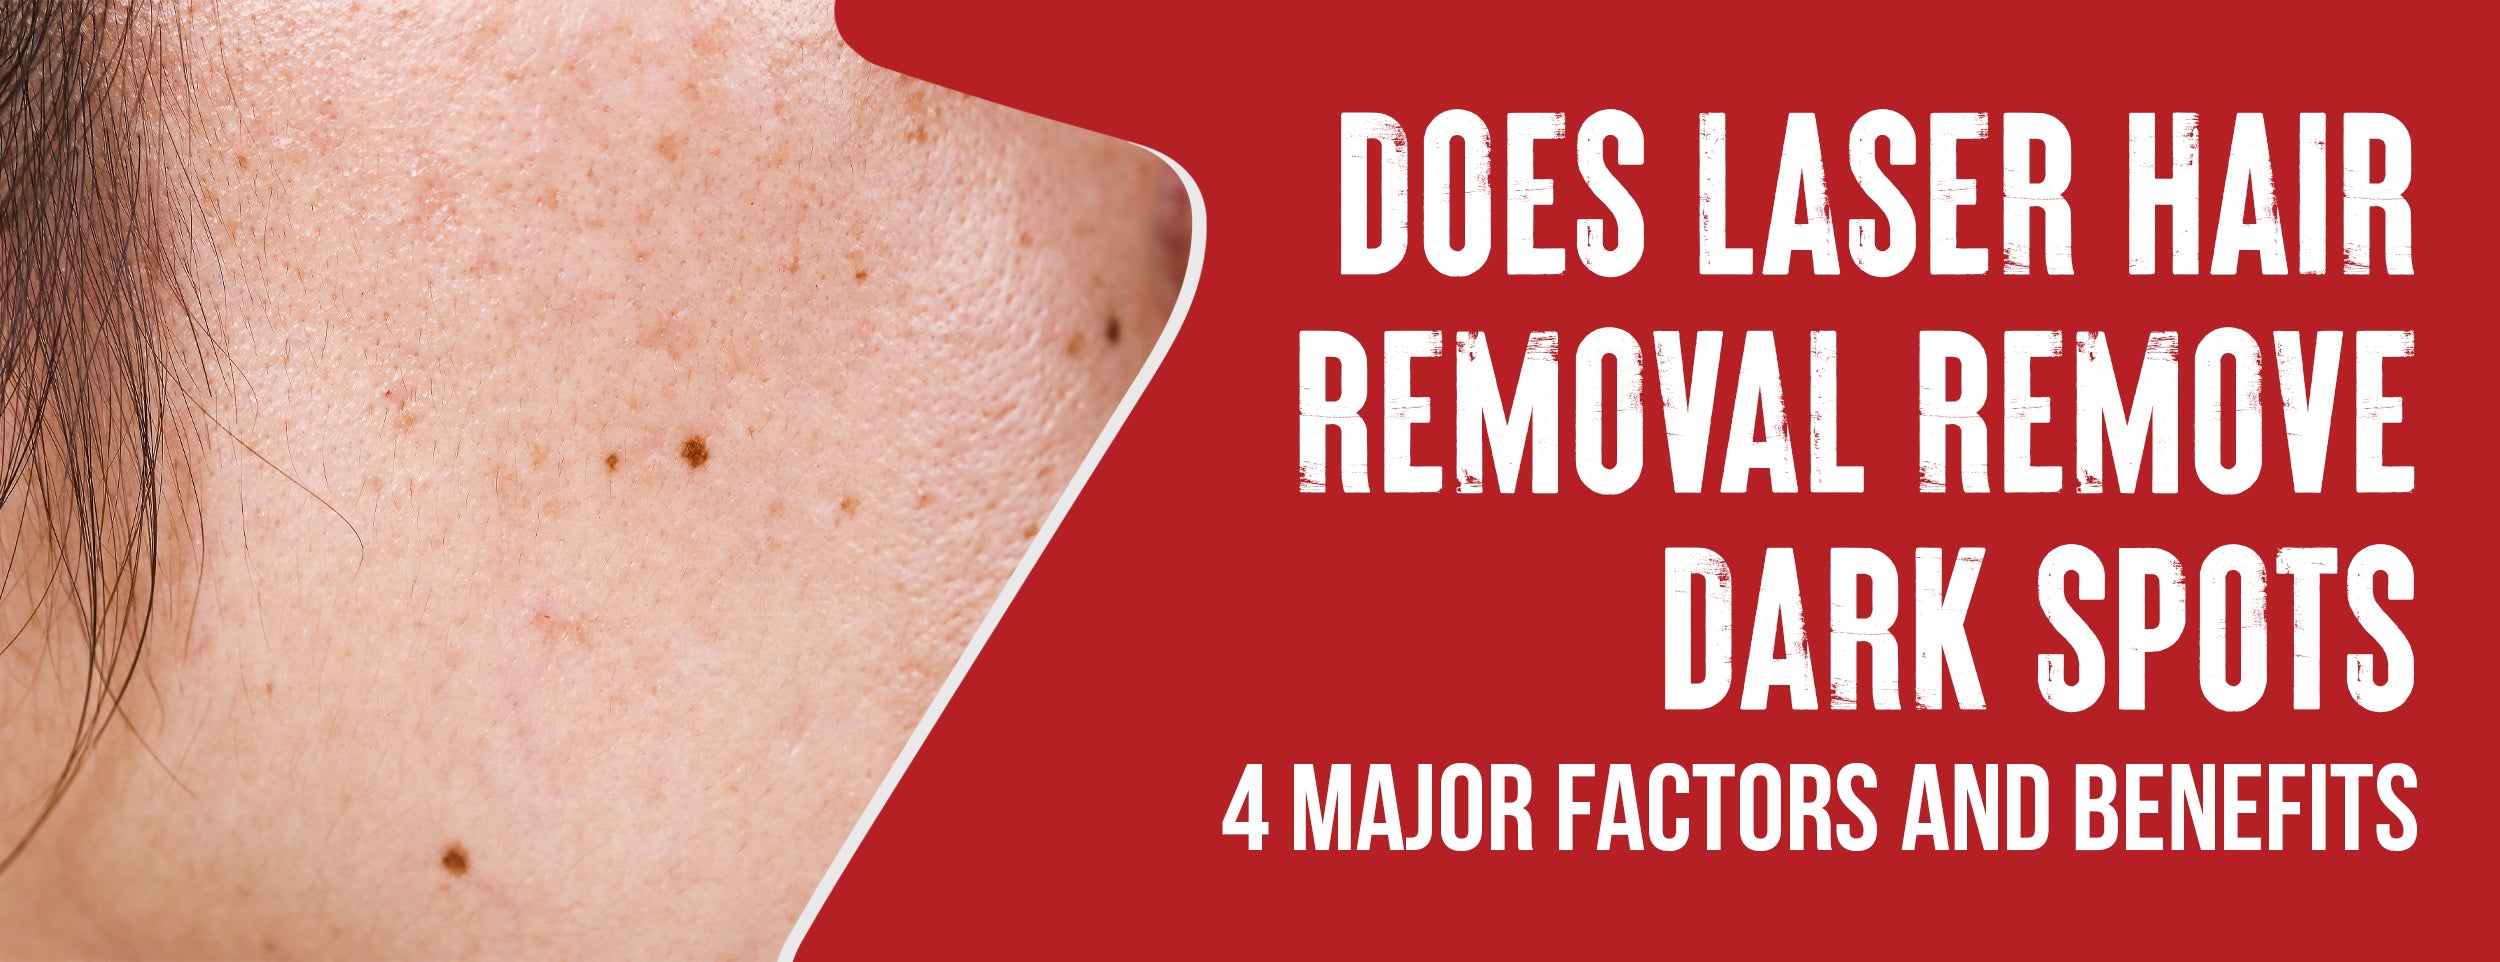 The 4 major factors and benefits of laser hair removal for dark spots